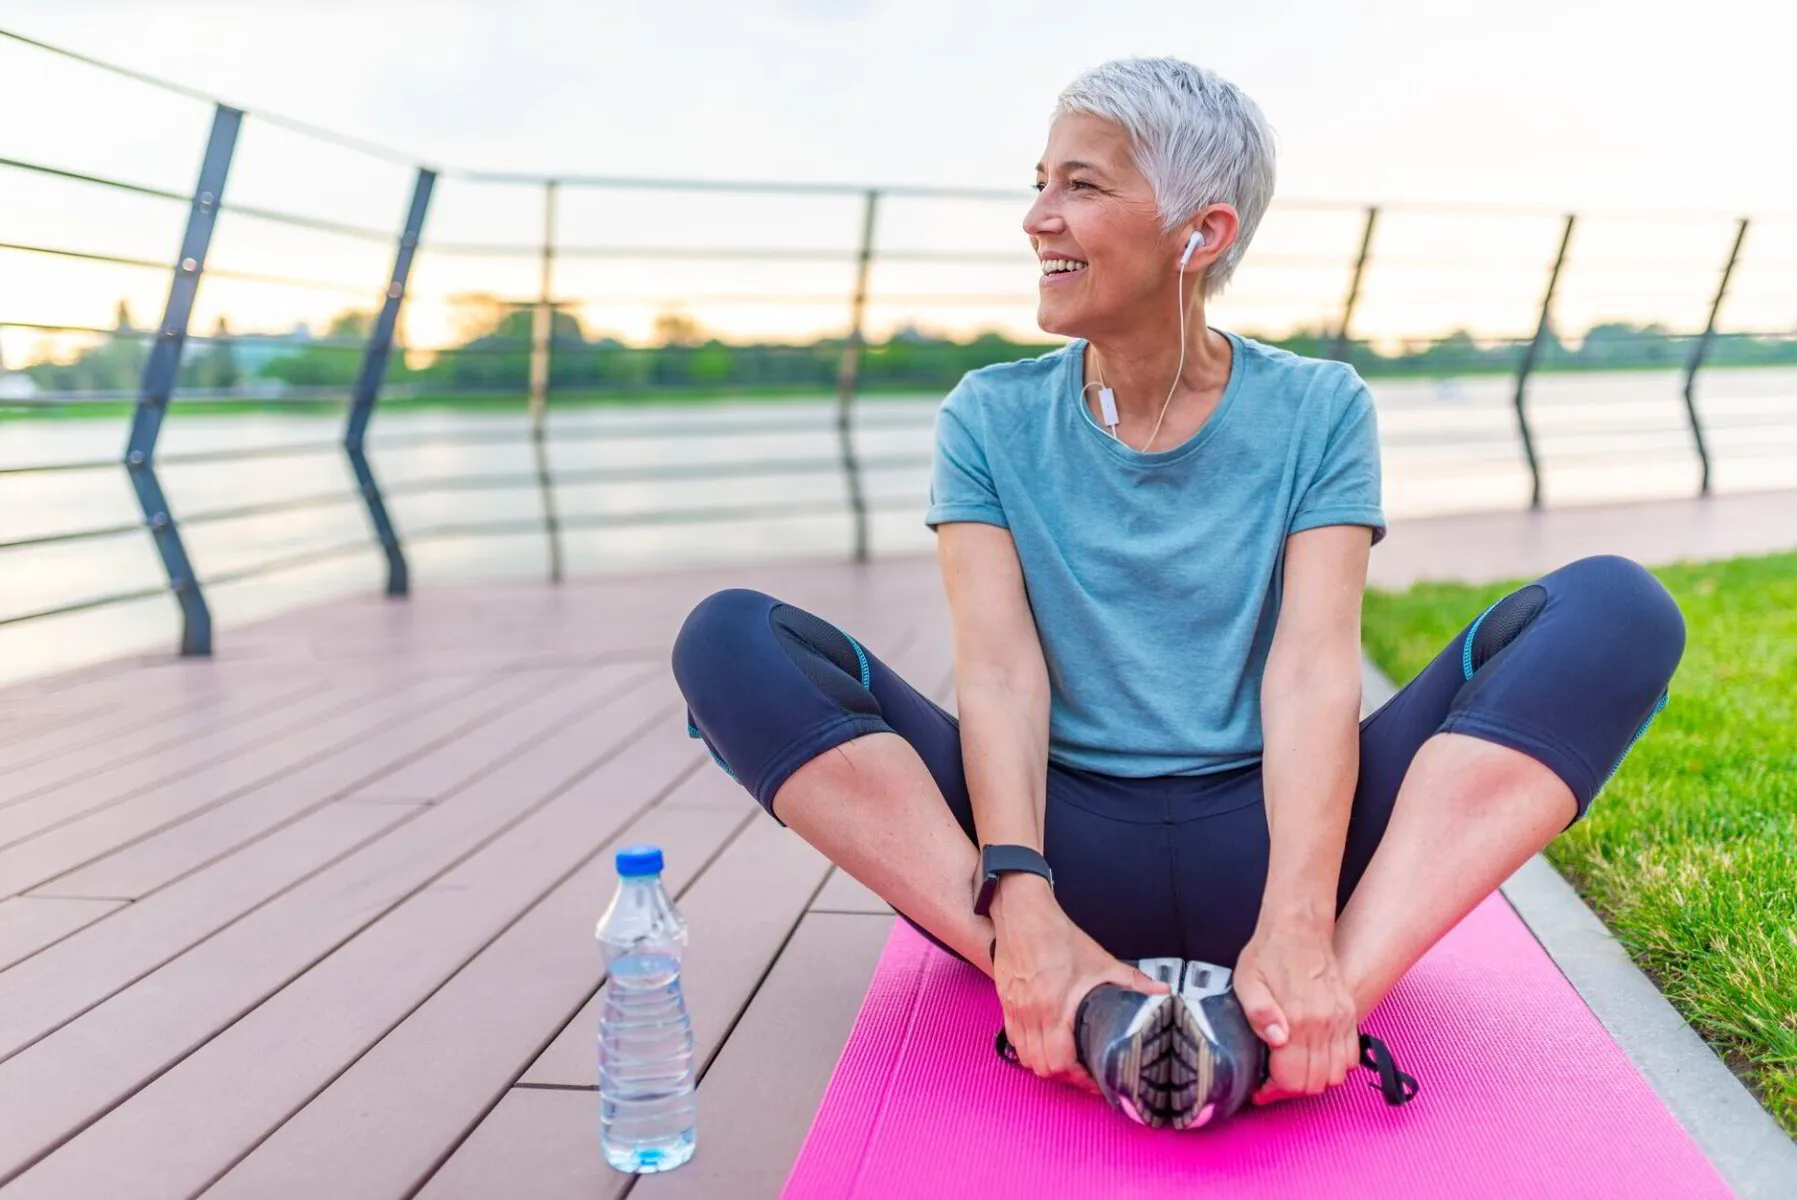 Smiling woman stretching on a yoga mat outdoors with a water bottle beside her.